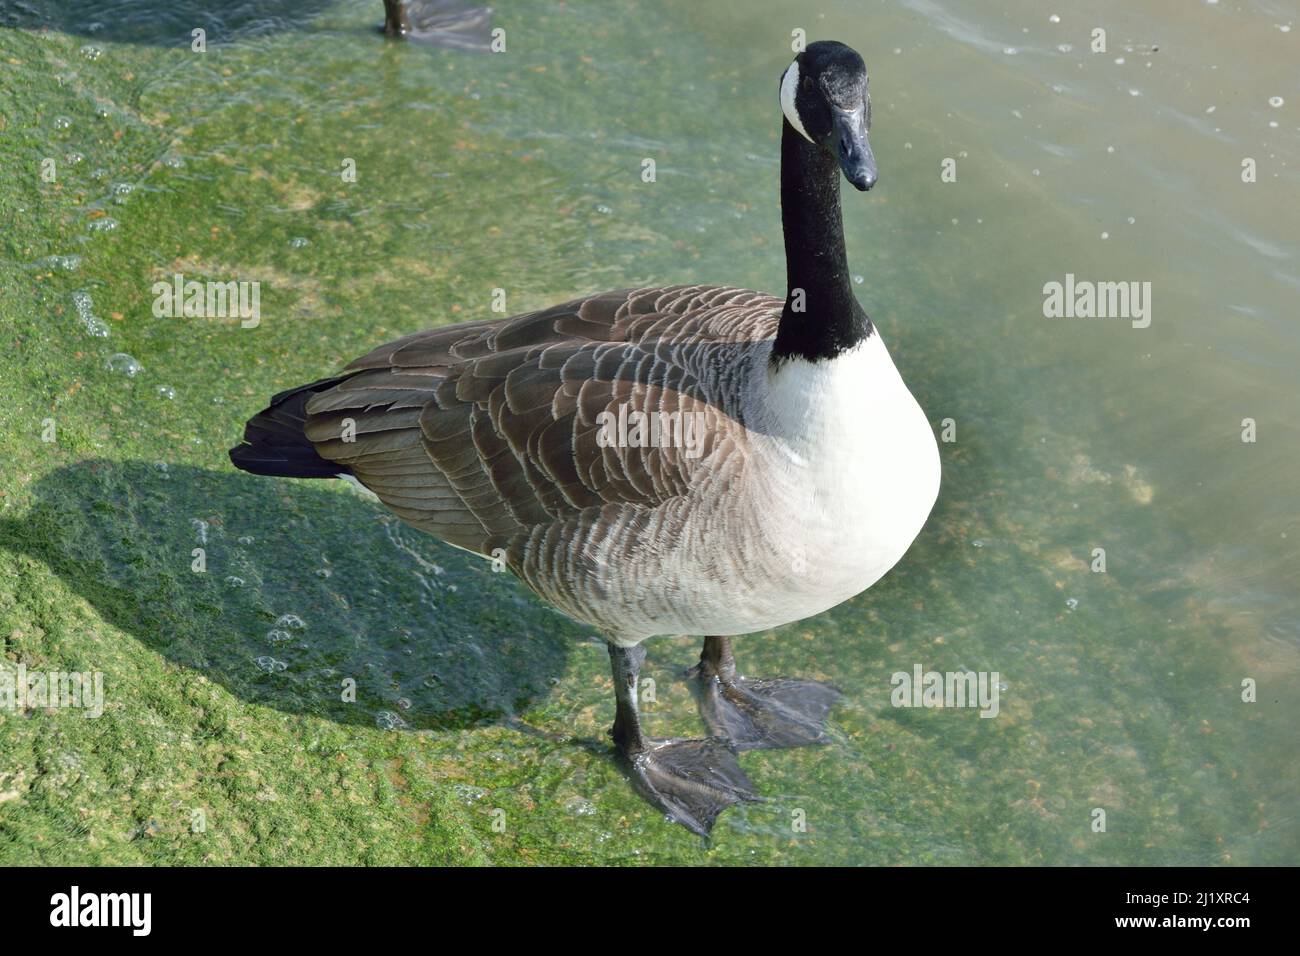 Canada Goose standing by the water on a slipway down to the River Thames in London Stock Photo